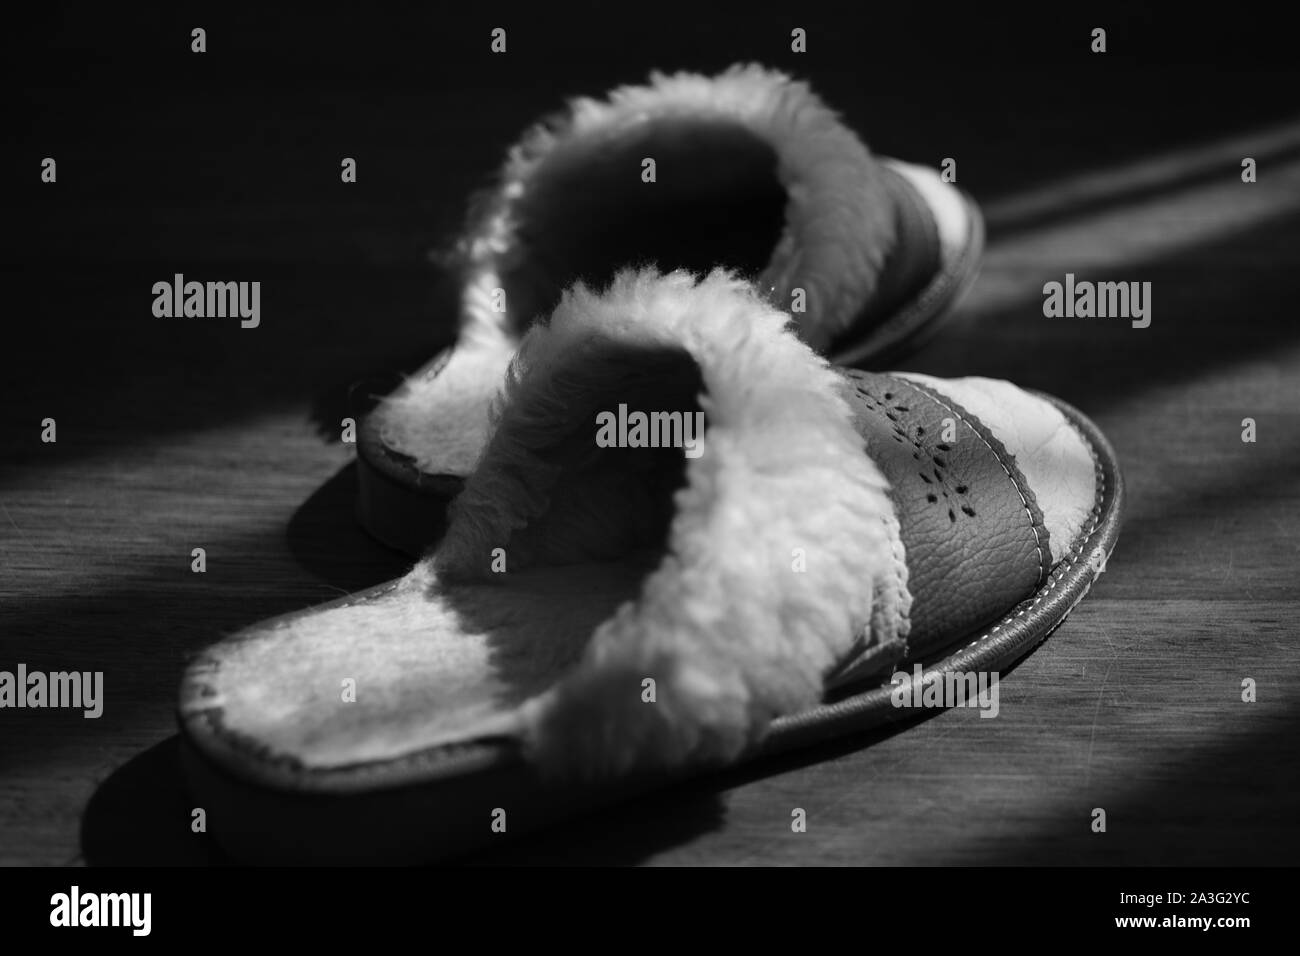 Women's slippers with a sheepskin on a wooden floor. Black and white photo. Stock Photo